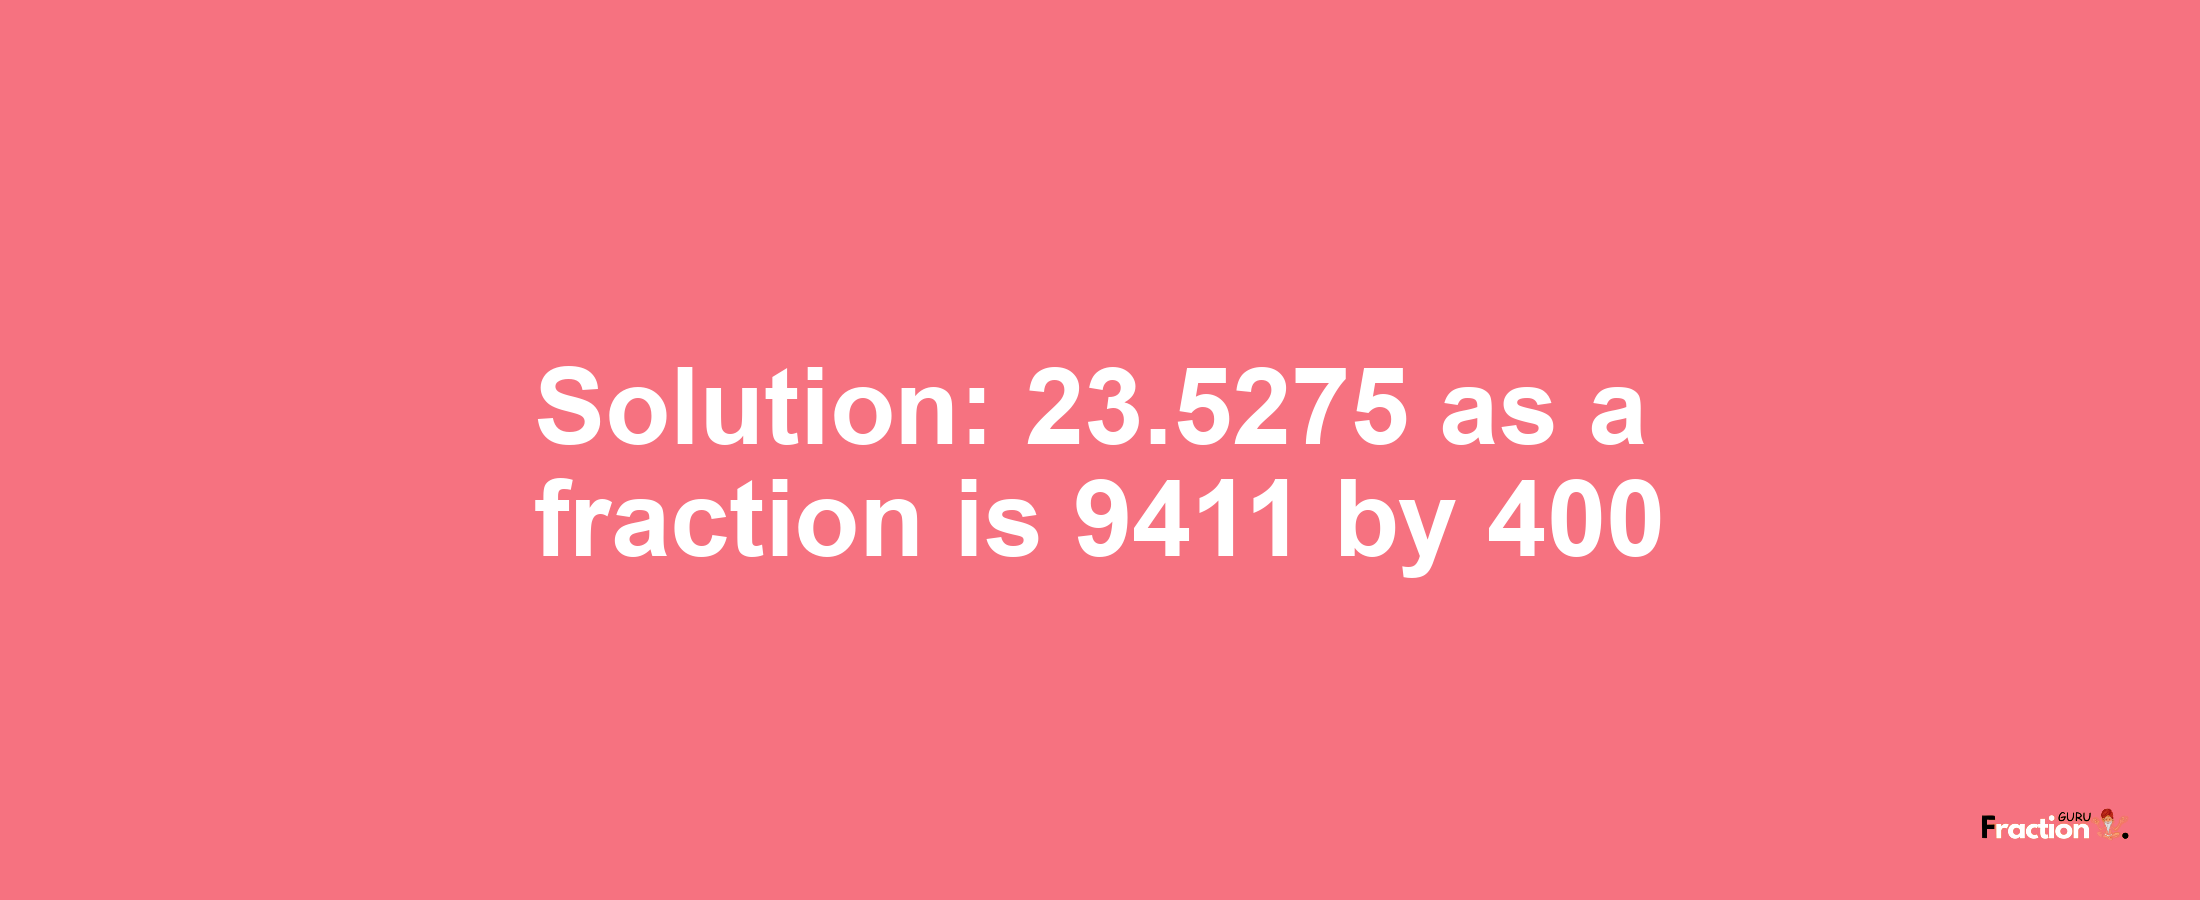 Solution:23.5275 as a fraction is 9411/400